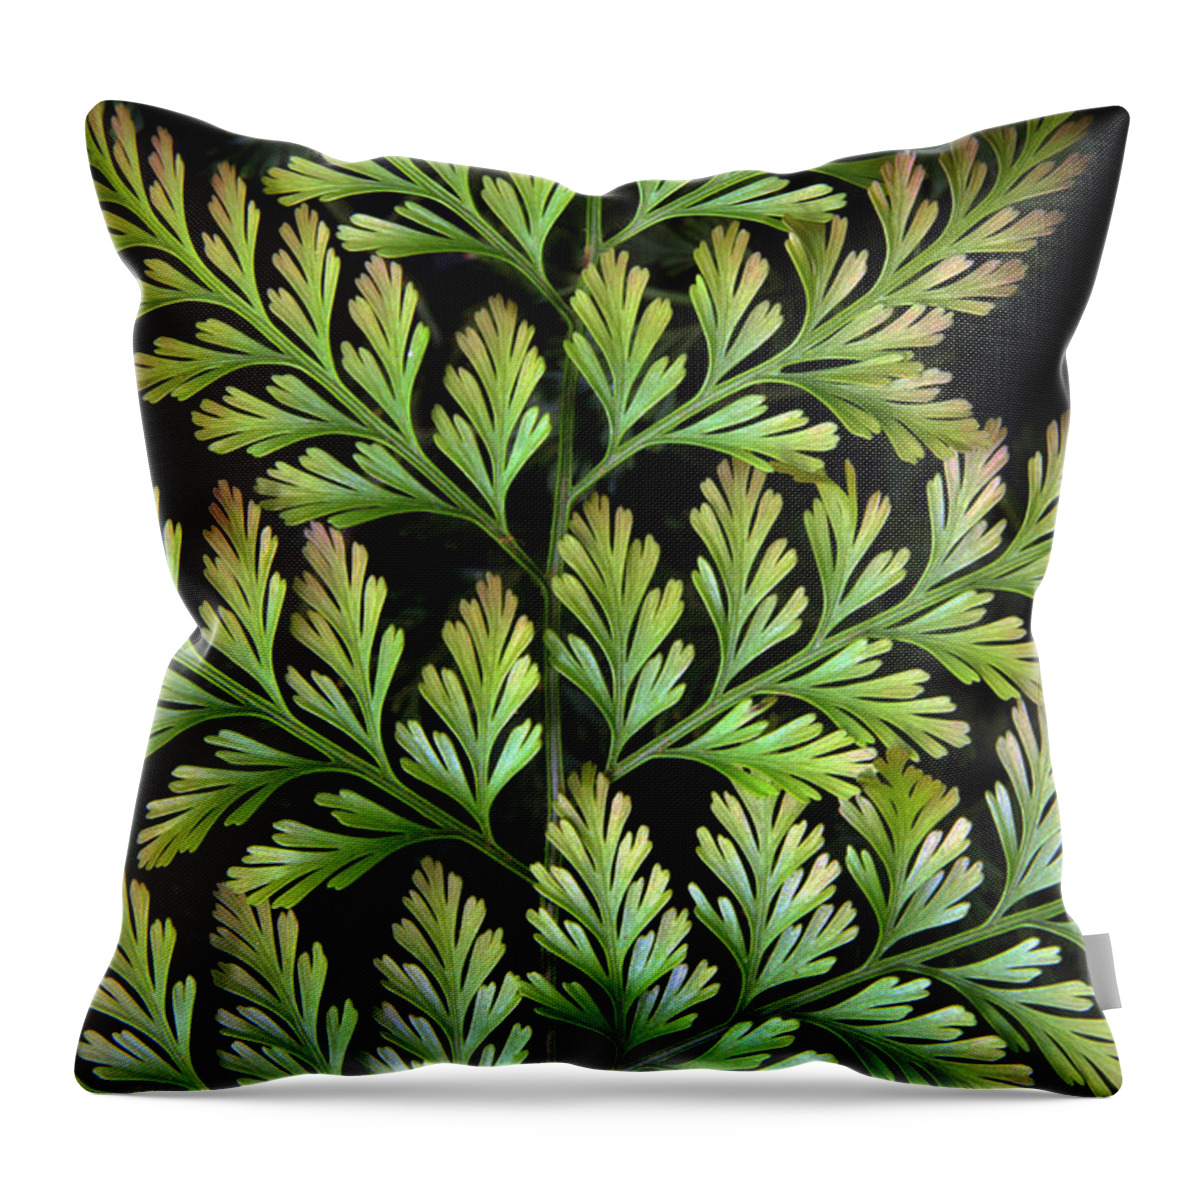 Leaf Throw Pillow featuring the photograph Leaf Abstract by Jessica Jenney